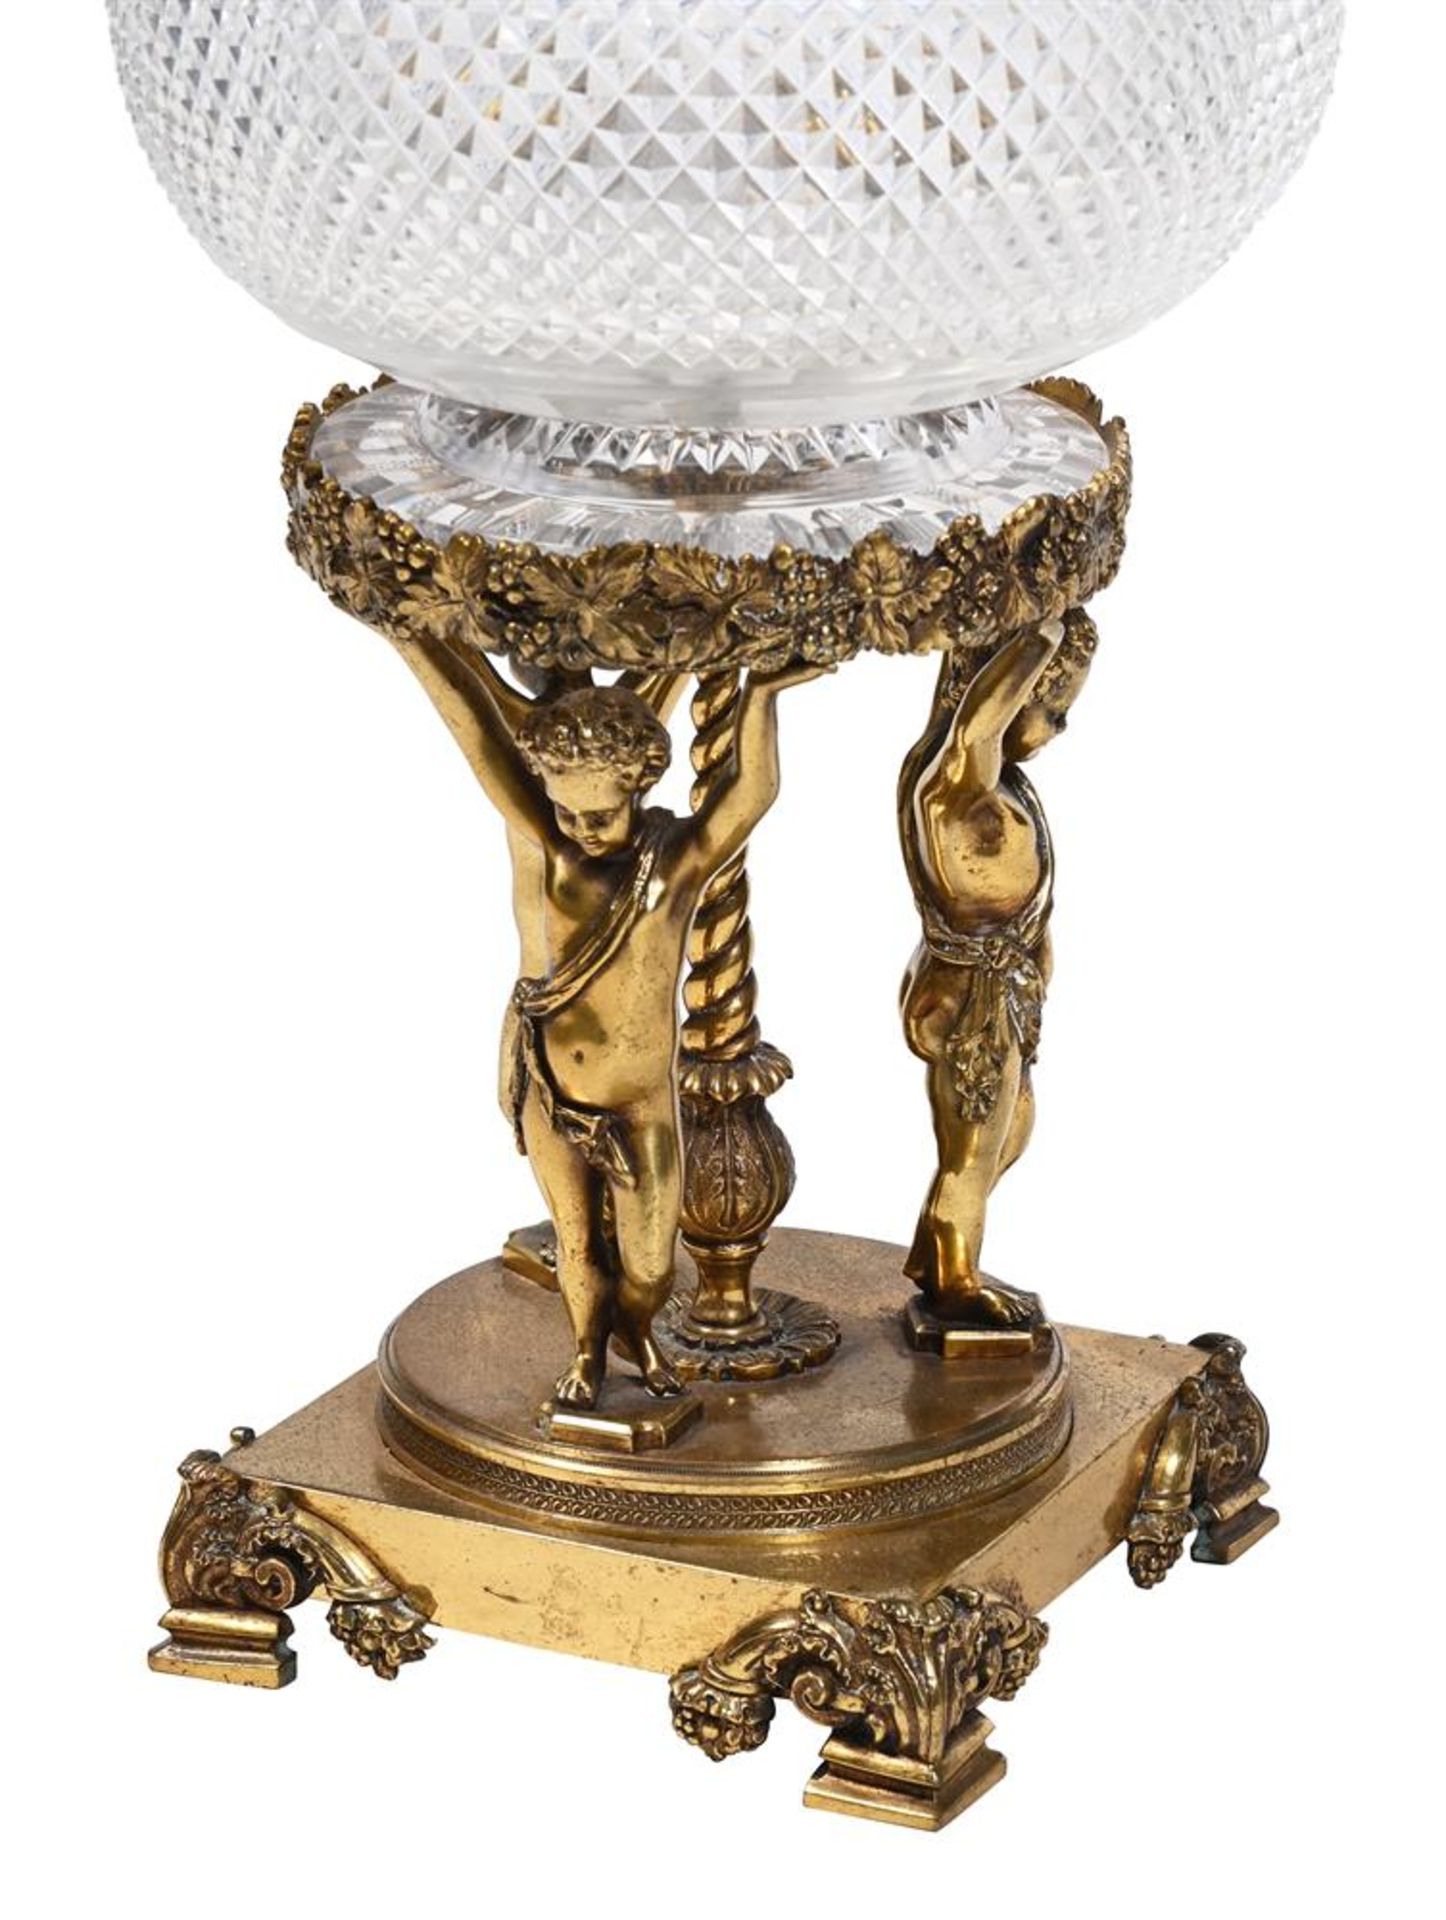 A FRENCH BRONZE AND GLASS CENTREPIECE LATE, 19TH OR EARLY 20TH CENTURY - Image 3 of 3